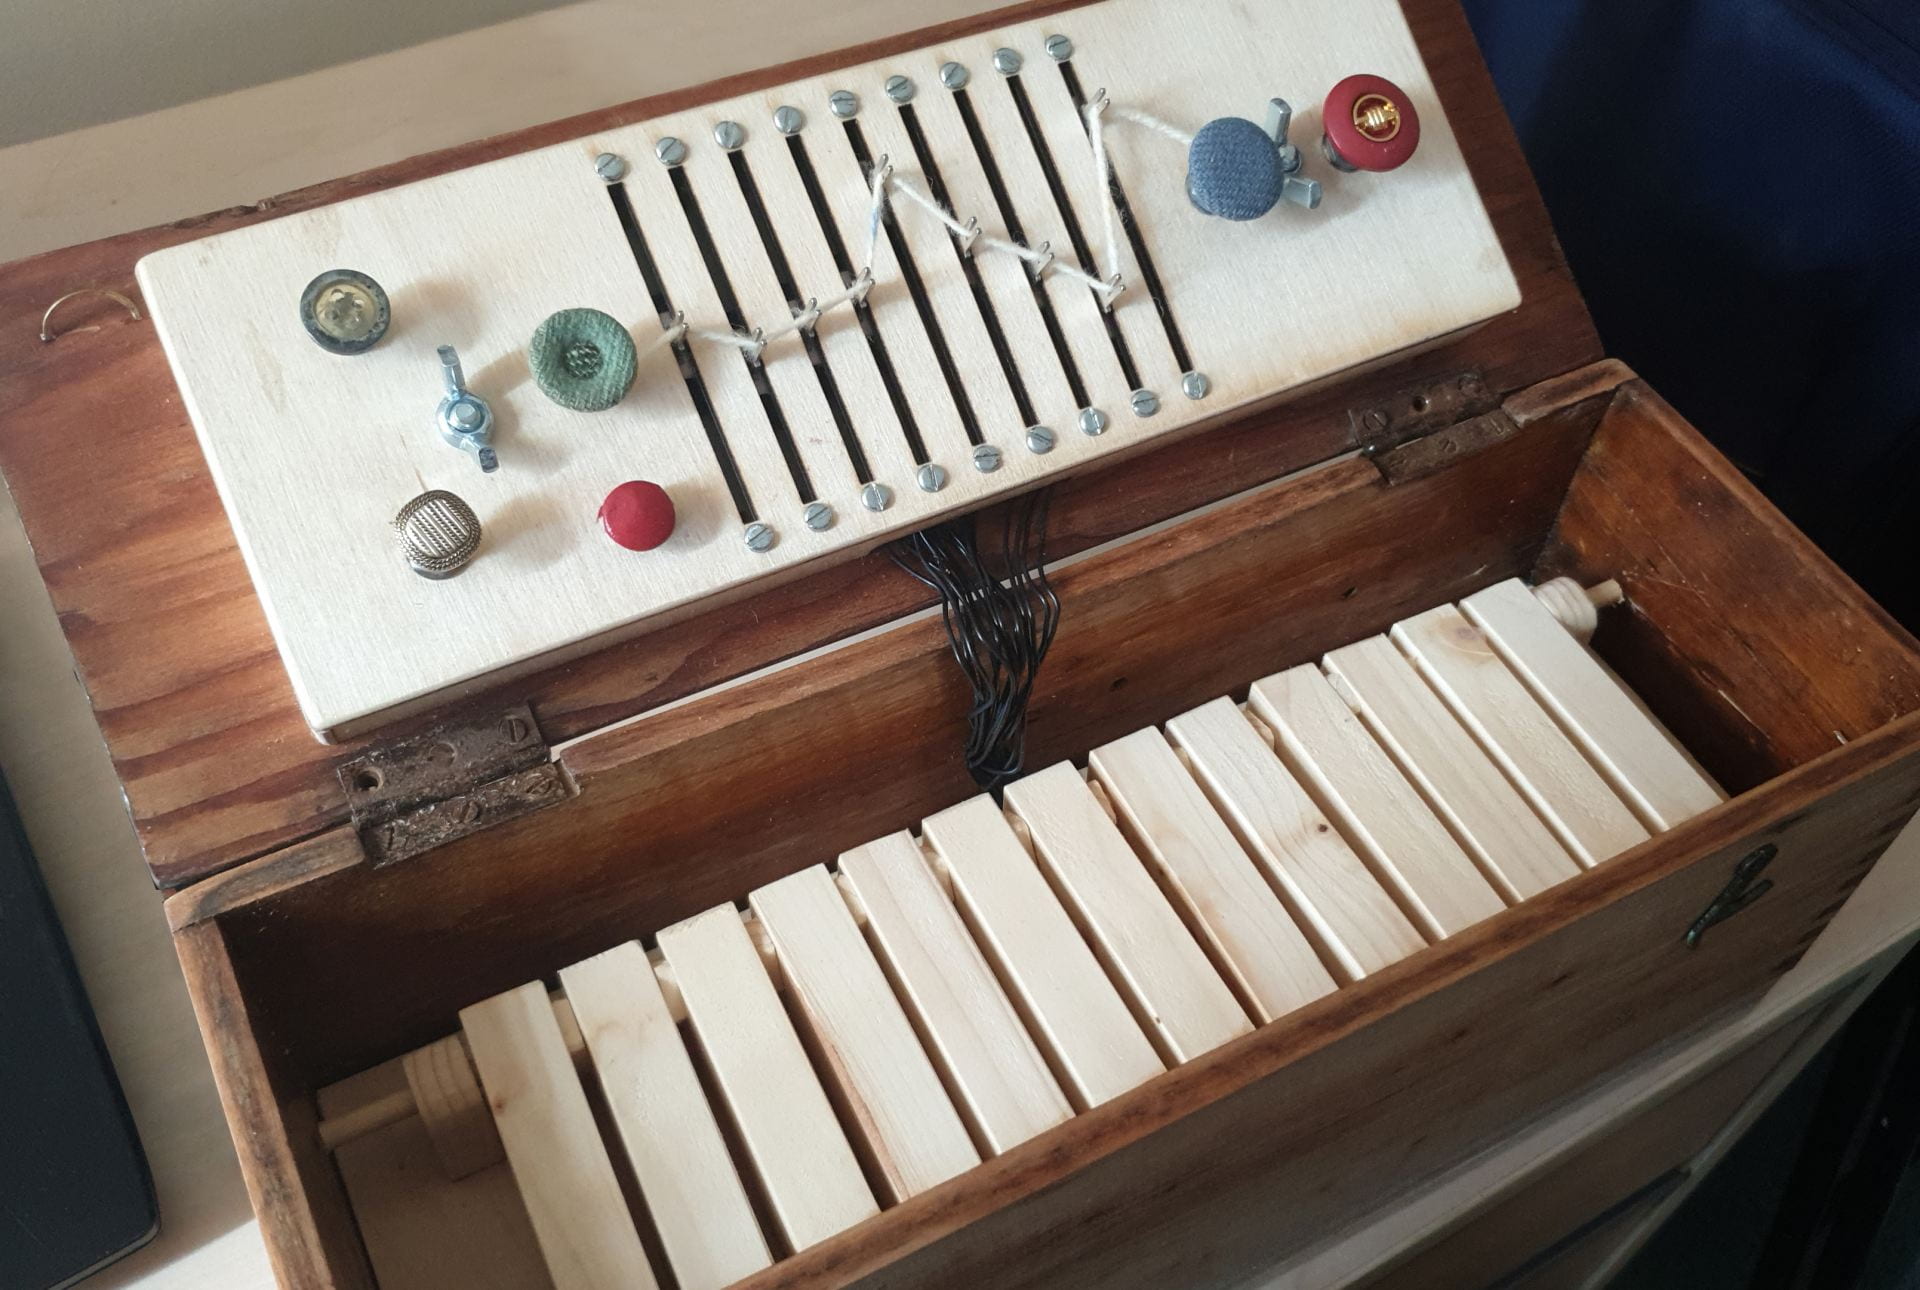 An old wooden box, with a wooden dashboard, and keys connected by wires.